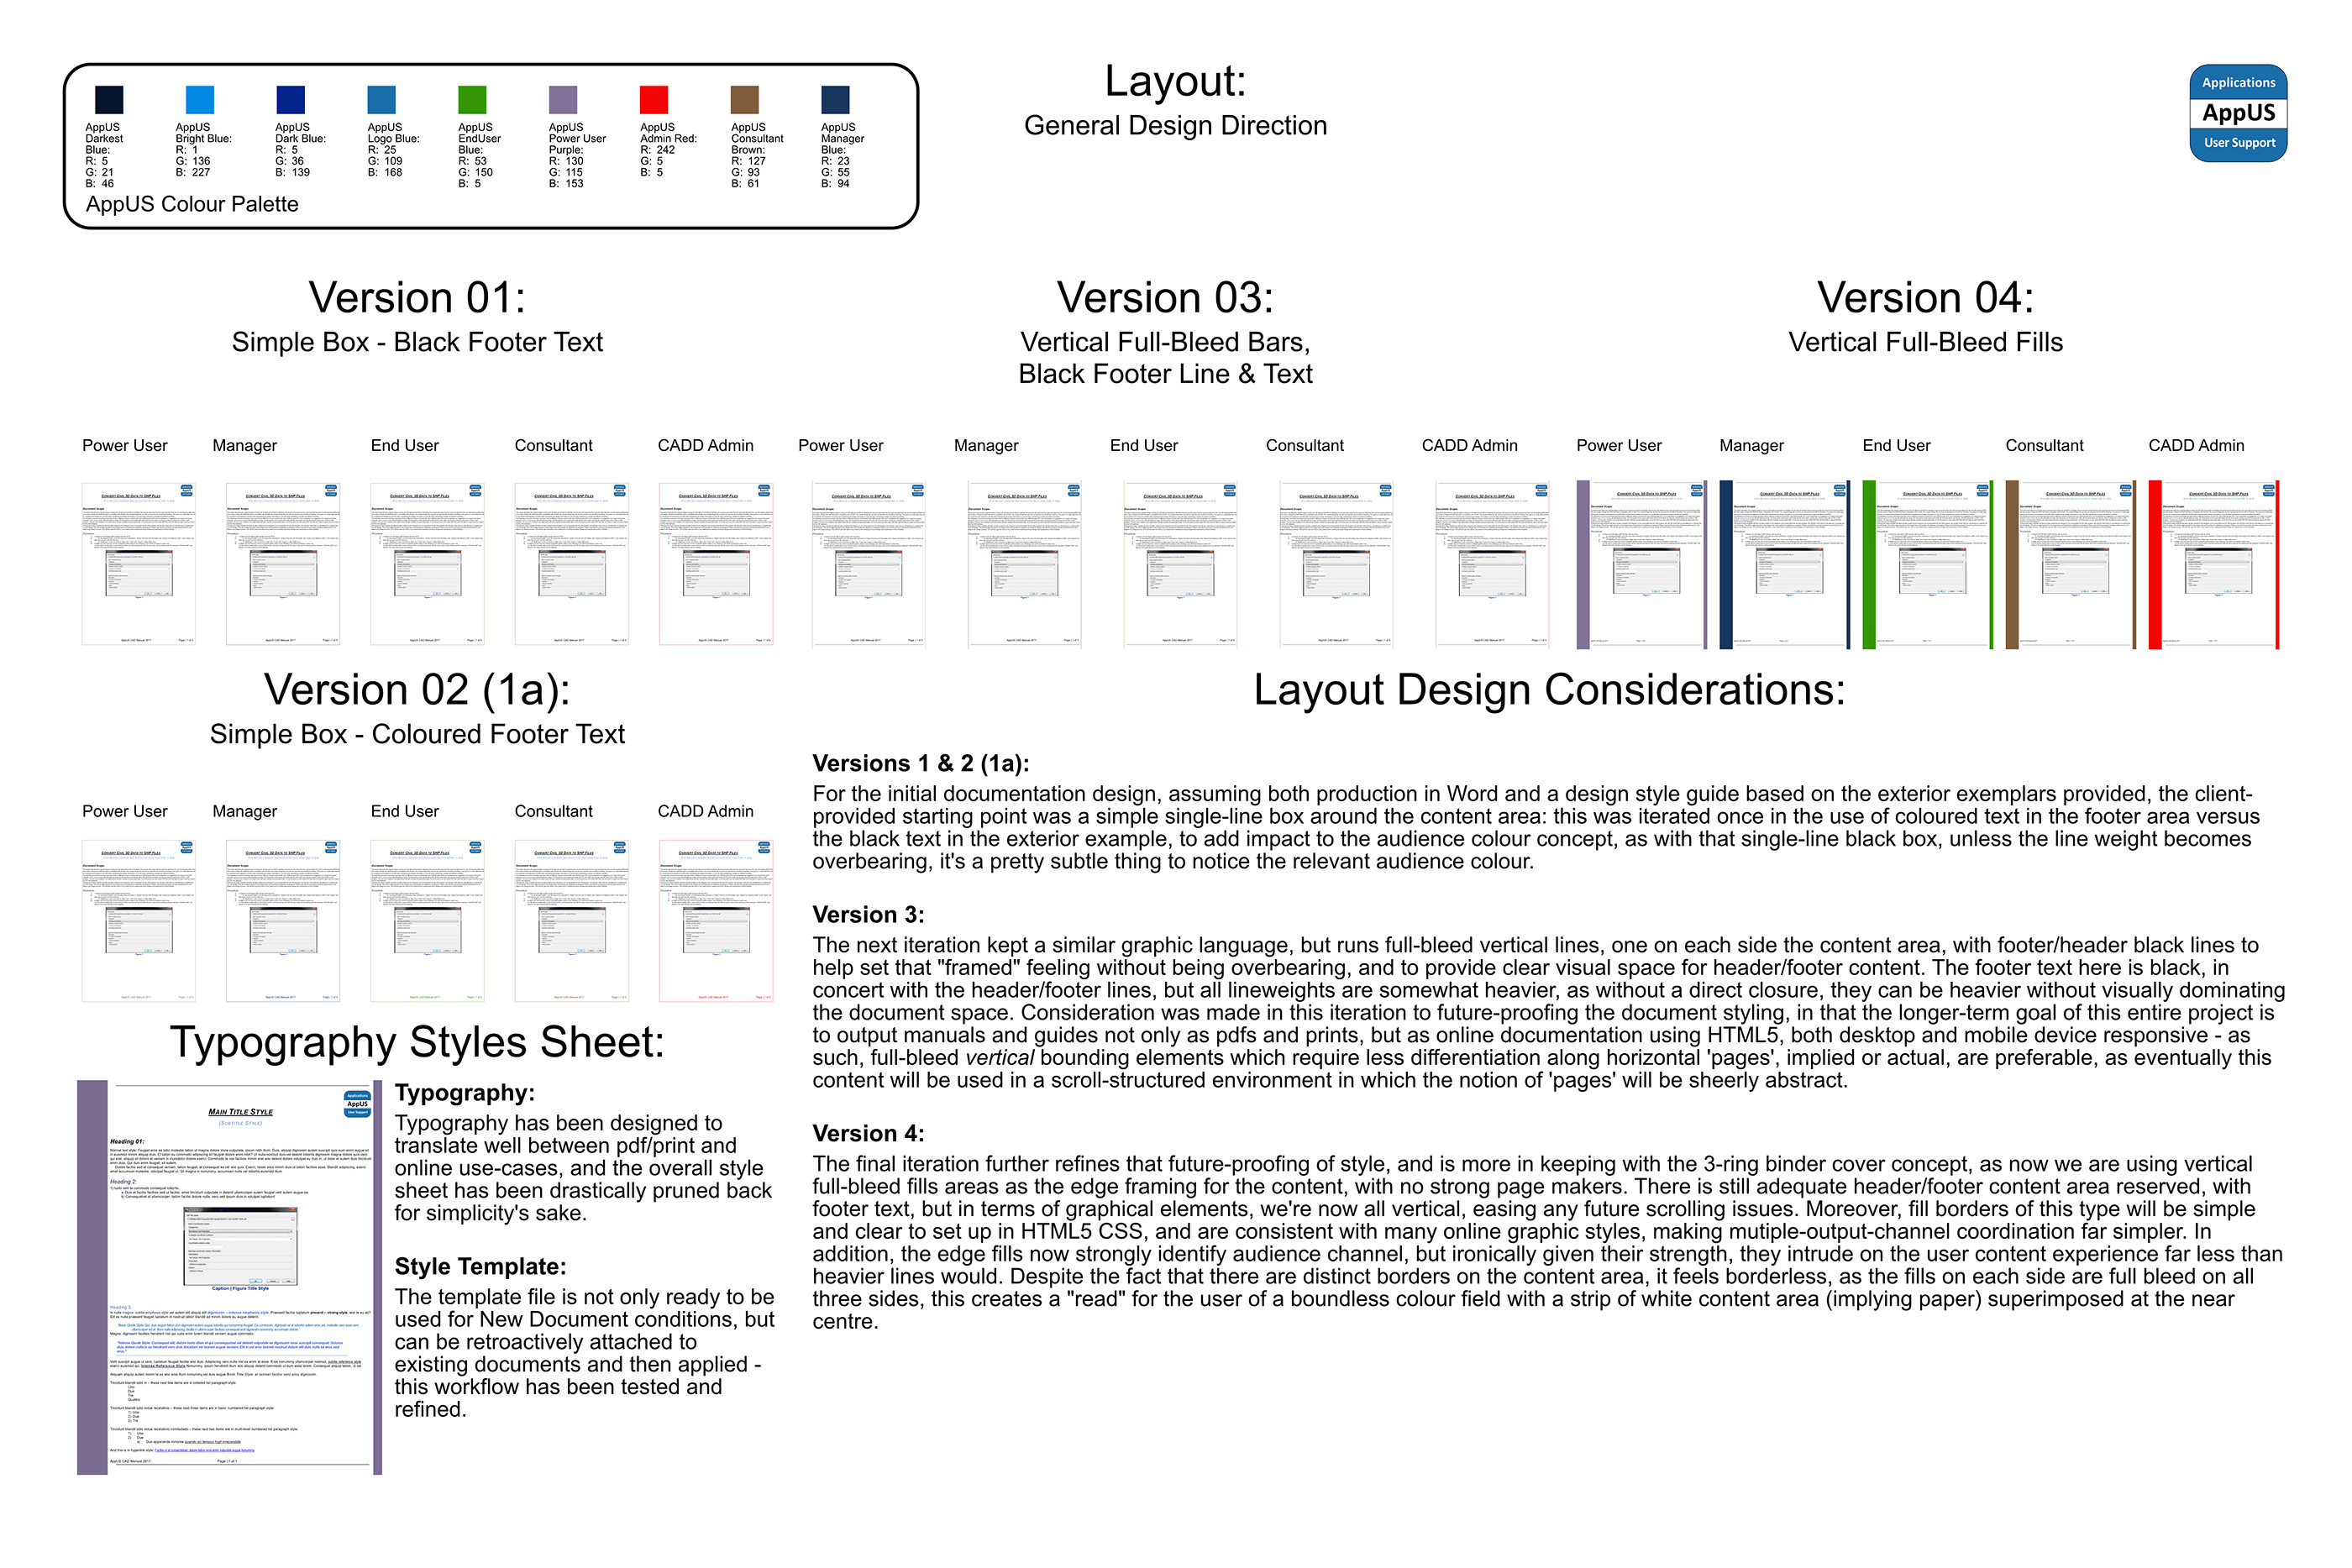 Meta documentation of design / layout process capturing client's committee decisions in flow